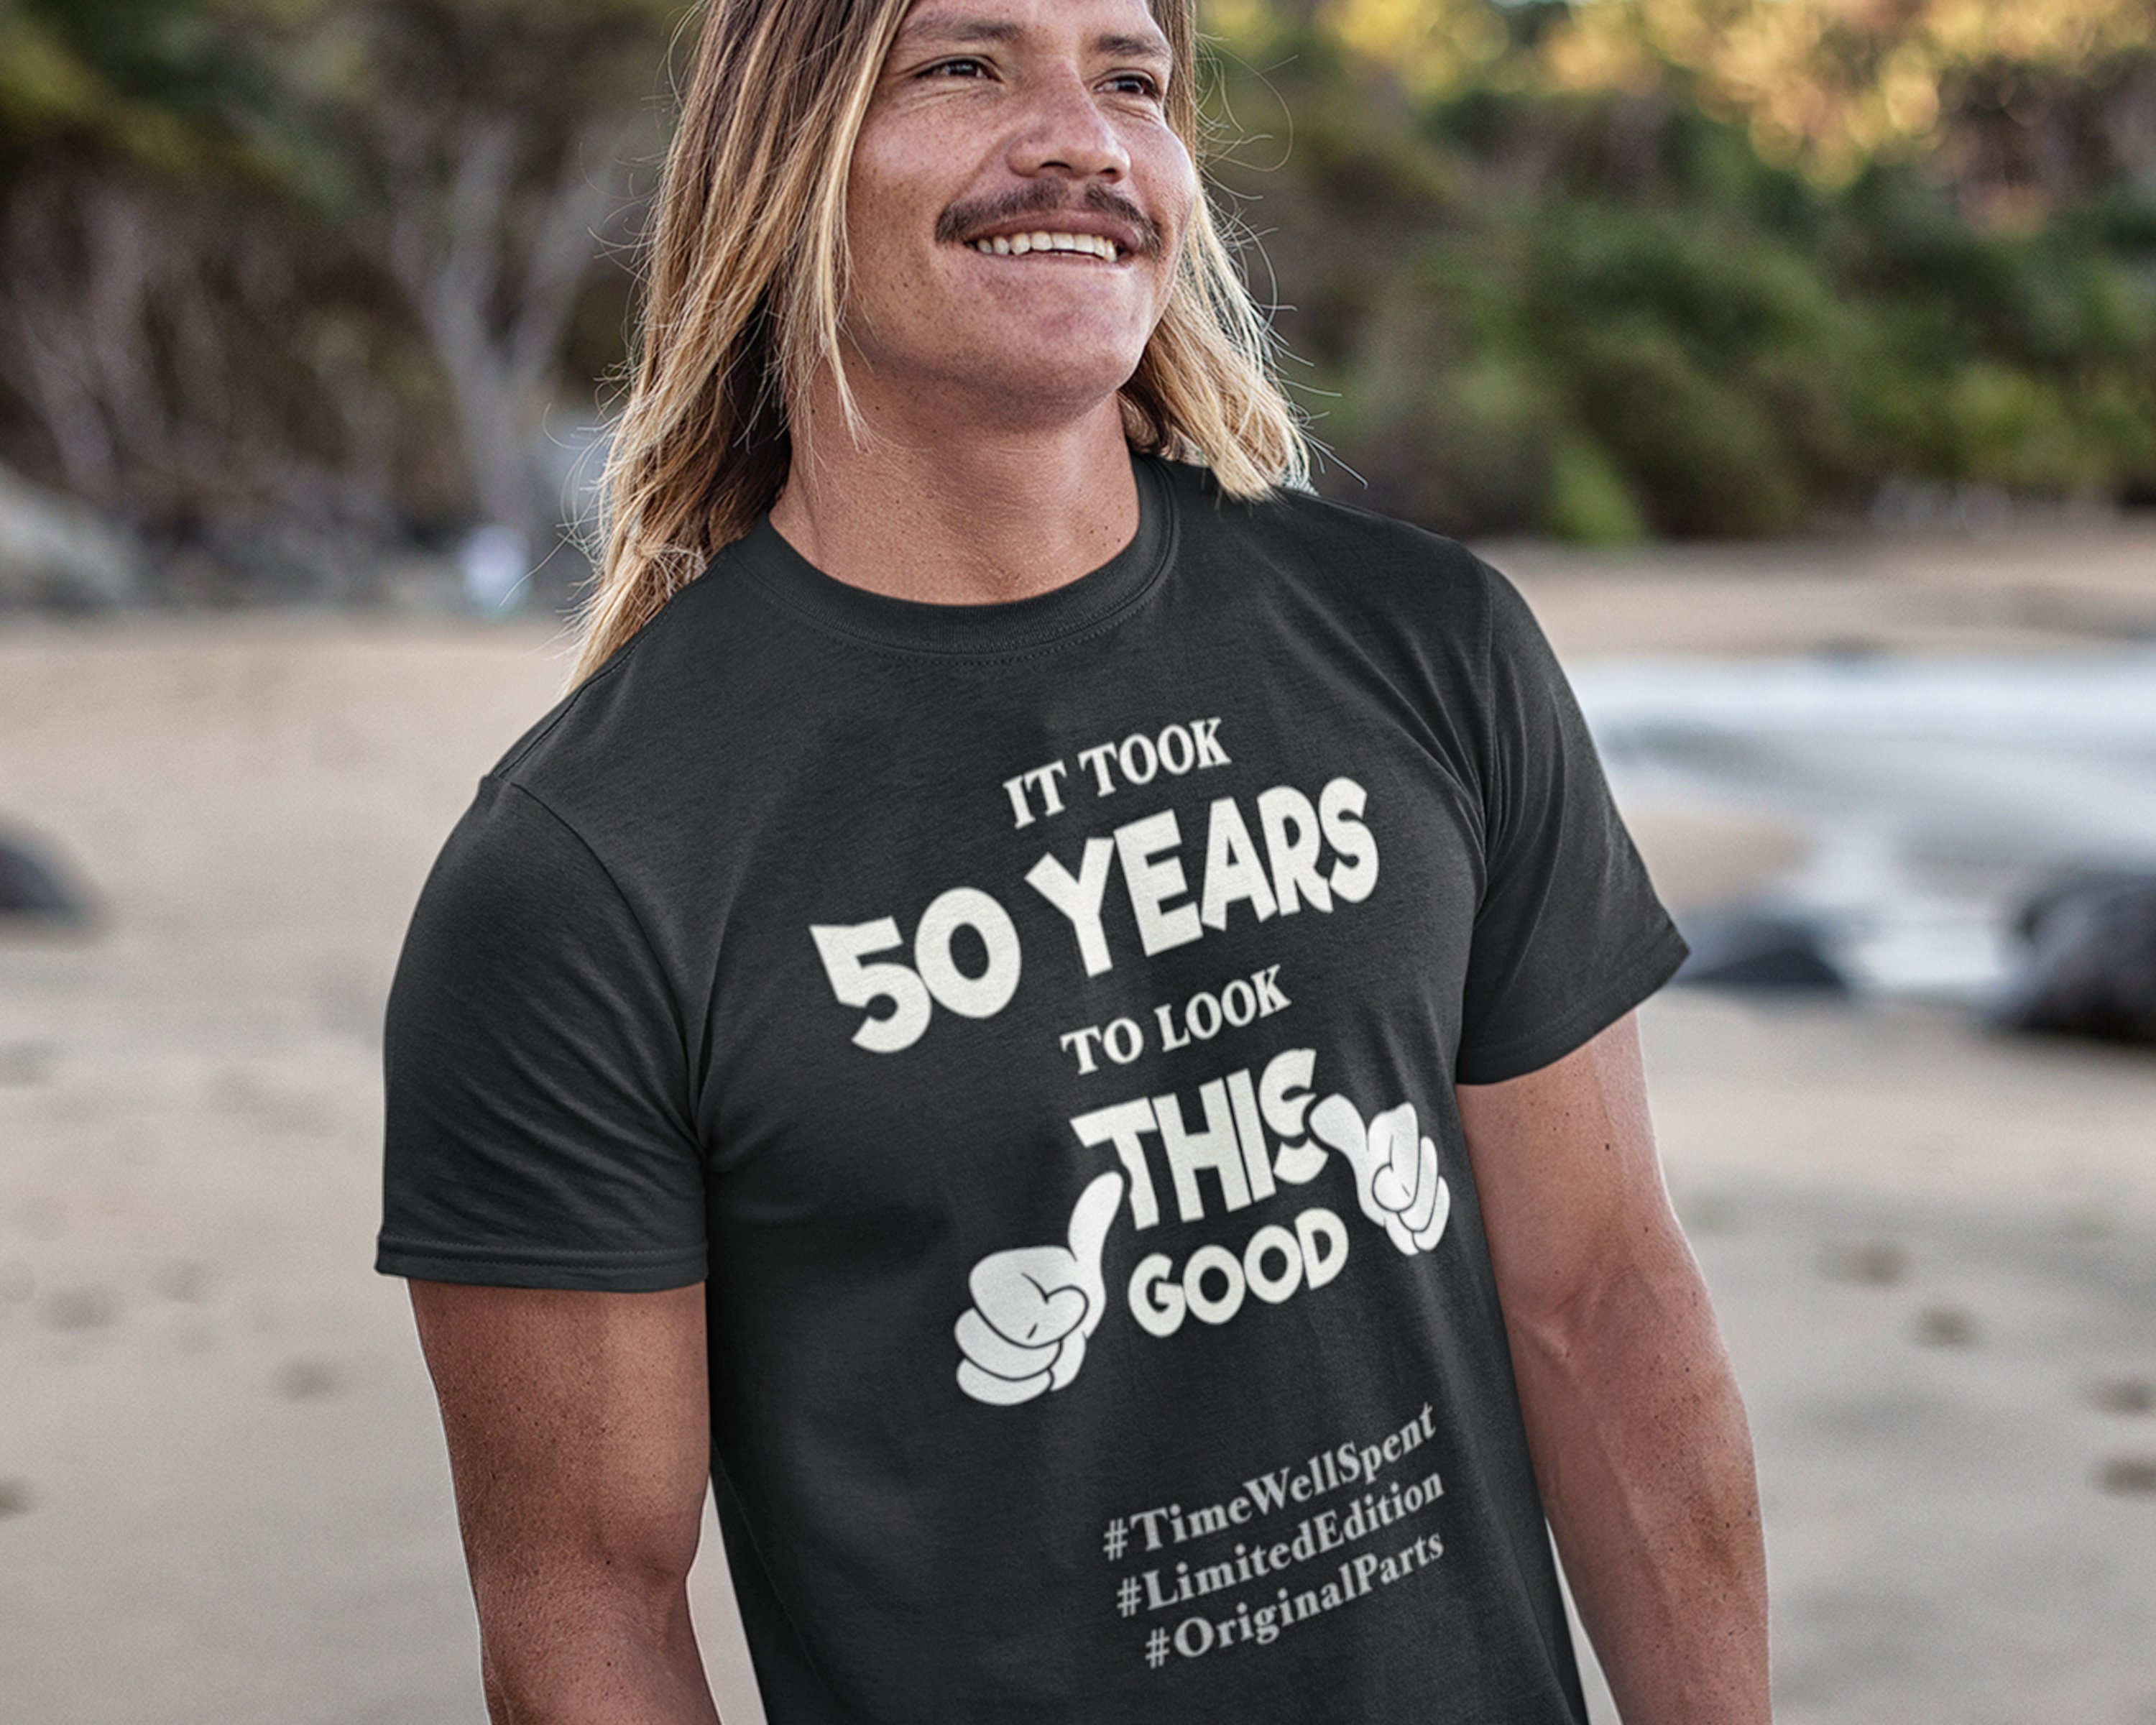 Ledsager Bugt børn 50th Birthday Shirt 50 Years Old to Look This Good Funny - Etsy